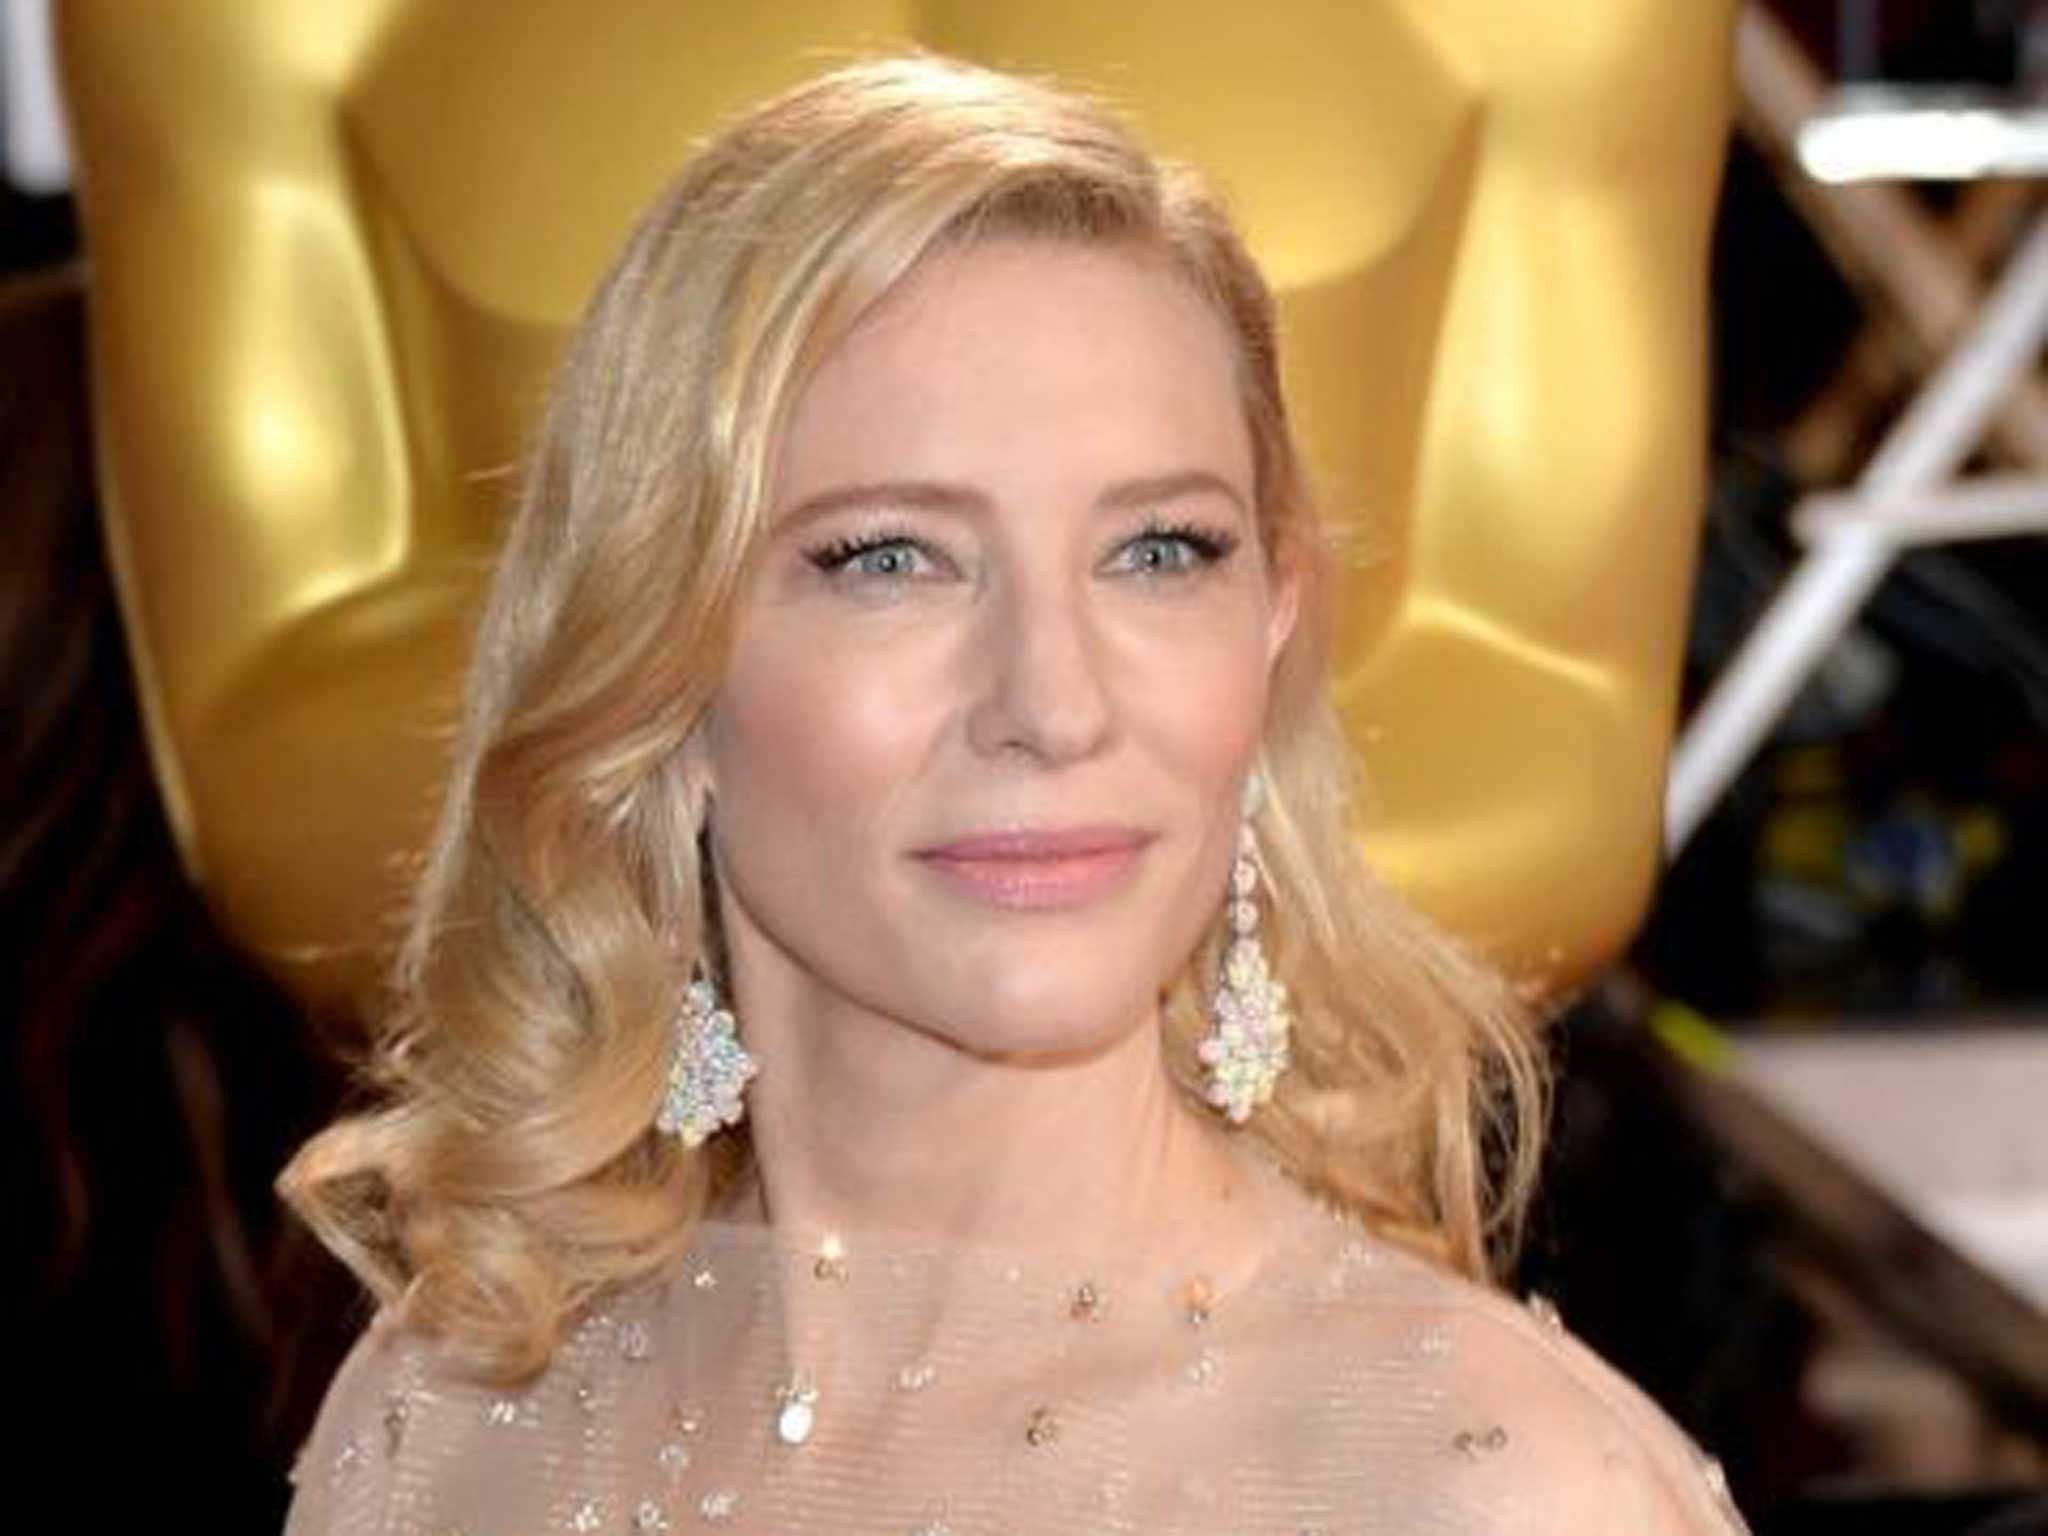 Apparently Cate Blanchett wore the most expensive dress at this years Oscars